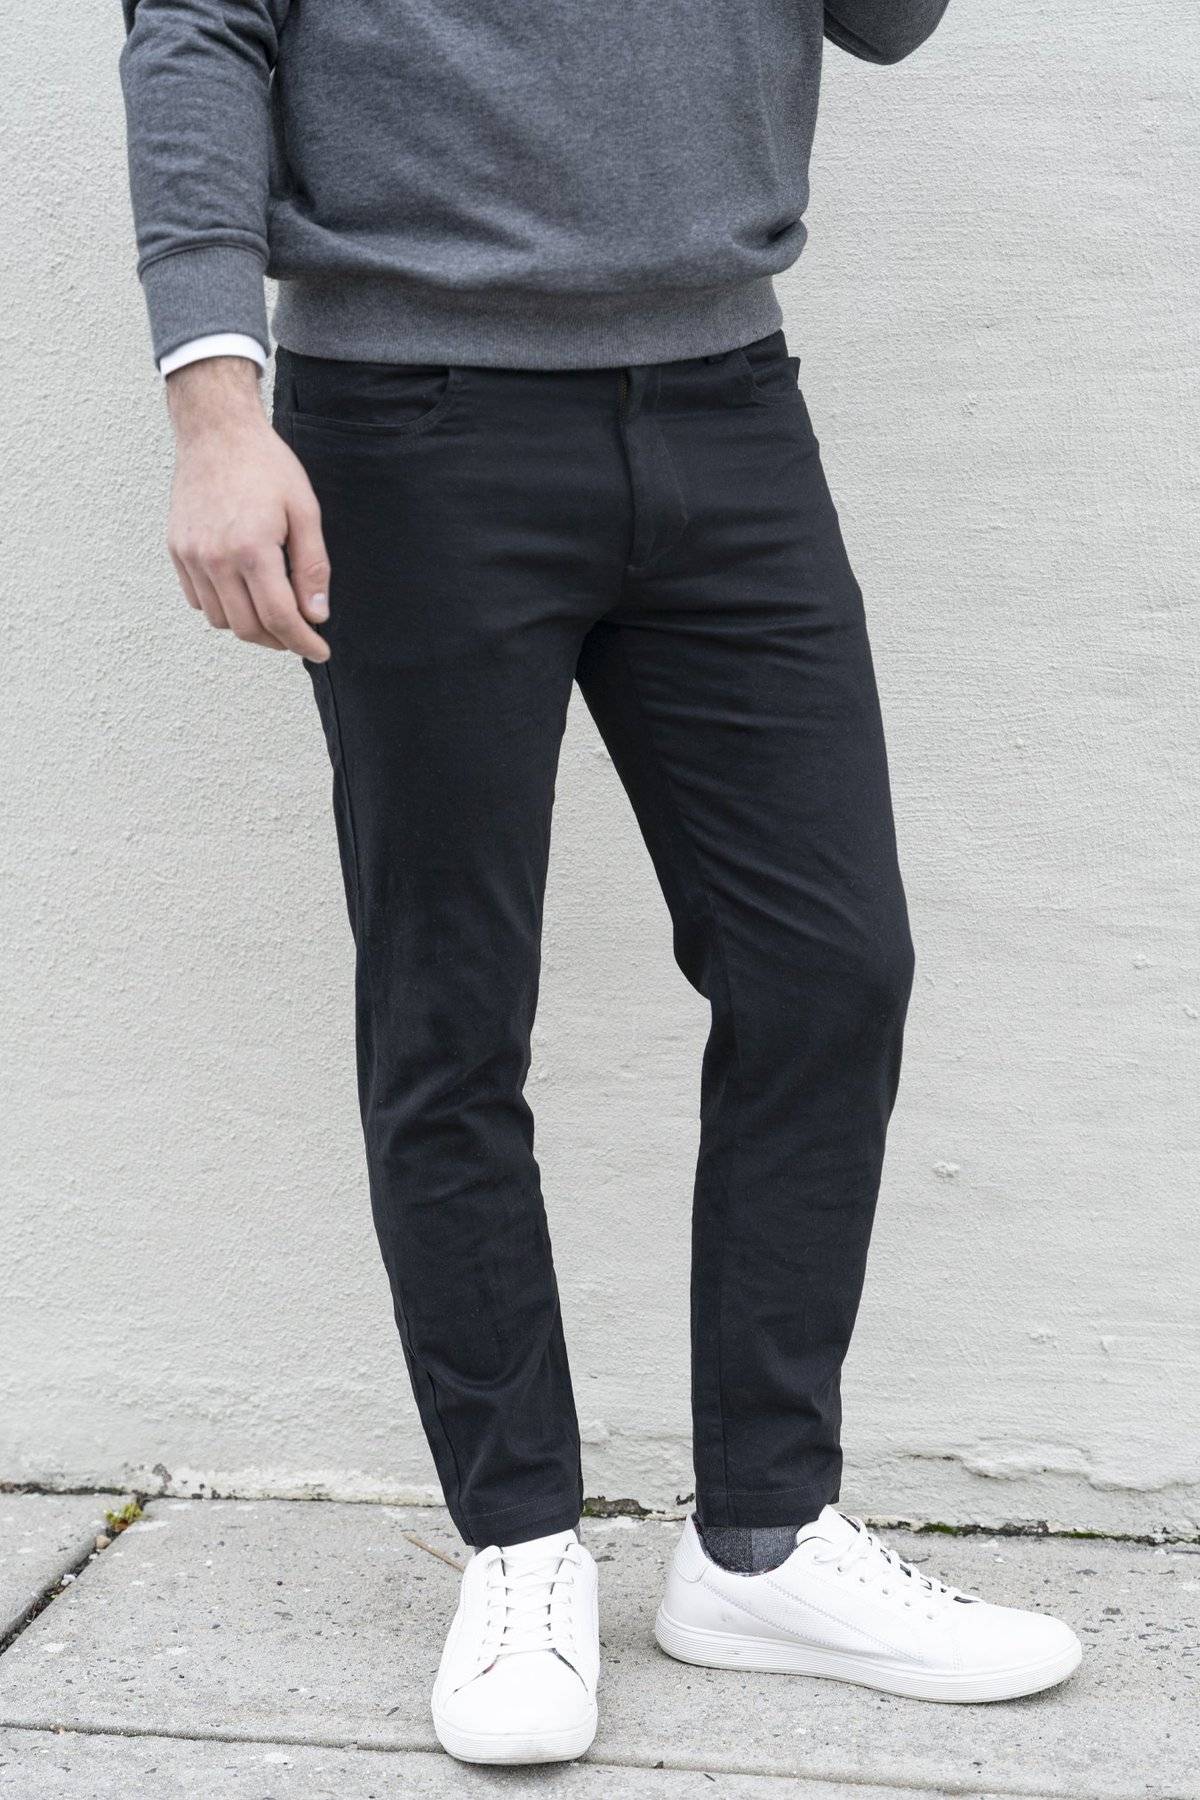 Man standing wearing white shoes, and black chinos from under510.com